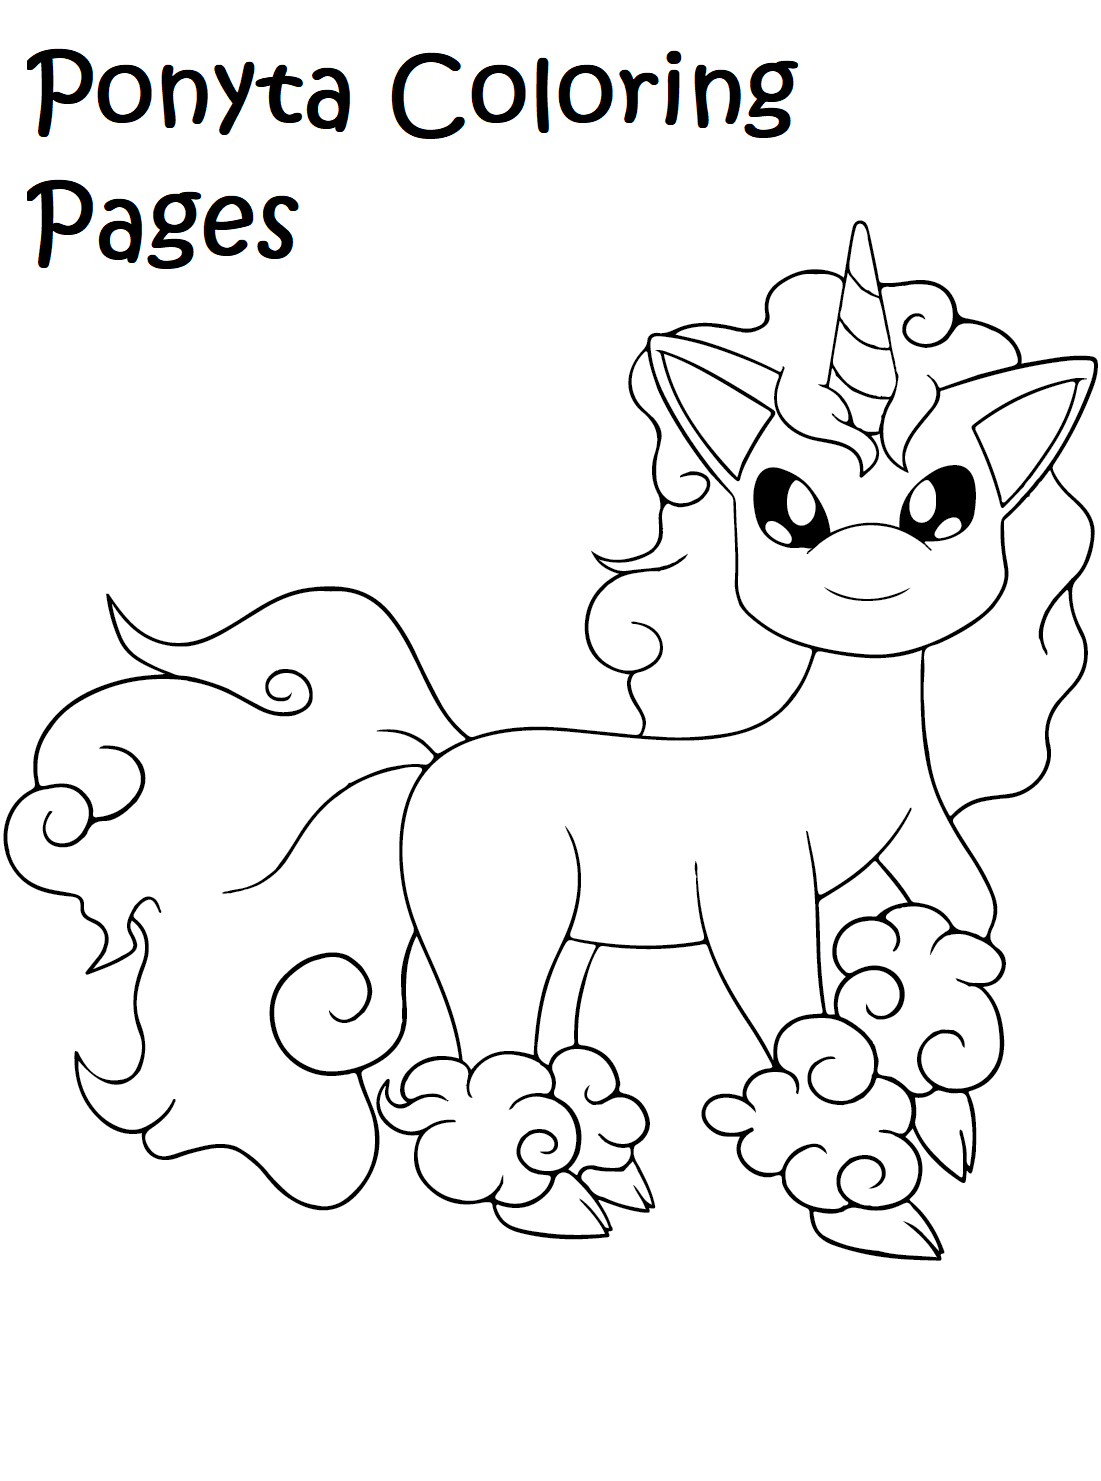 Leafeon Pokemon Coloring Pages Free Online For Kids